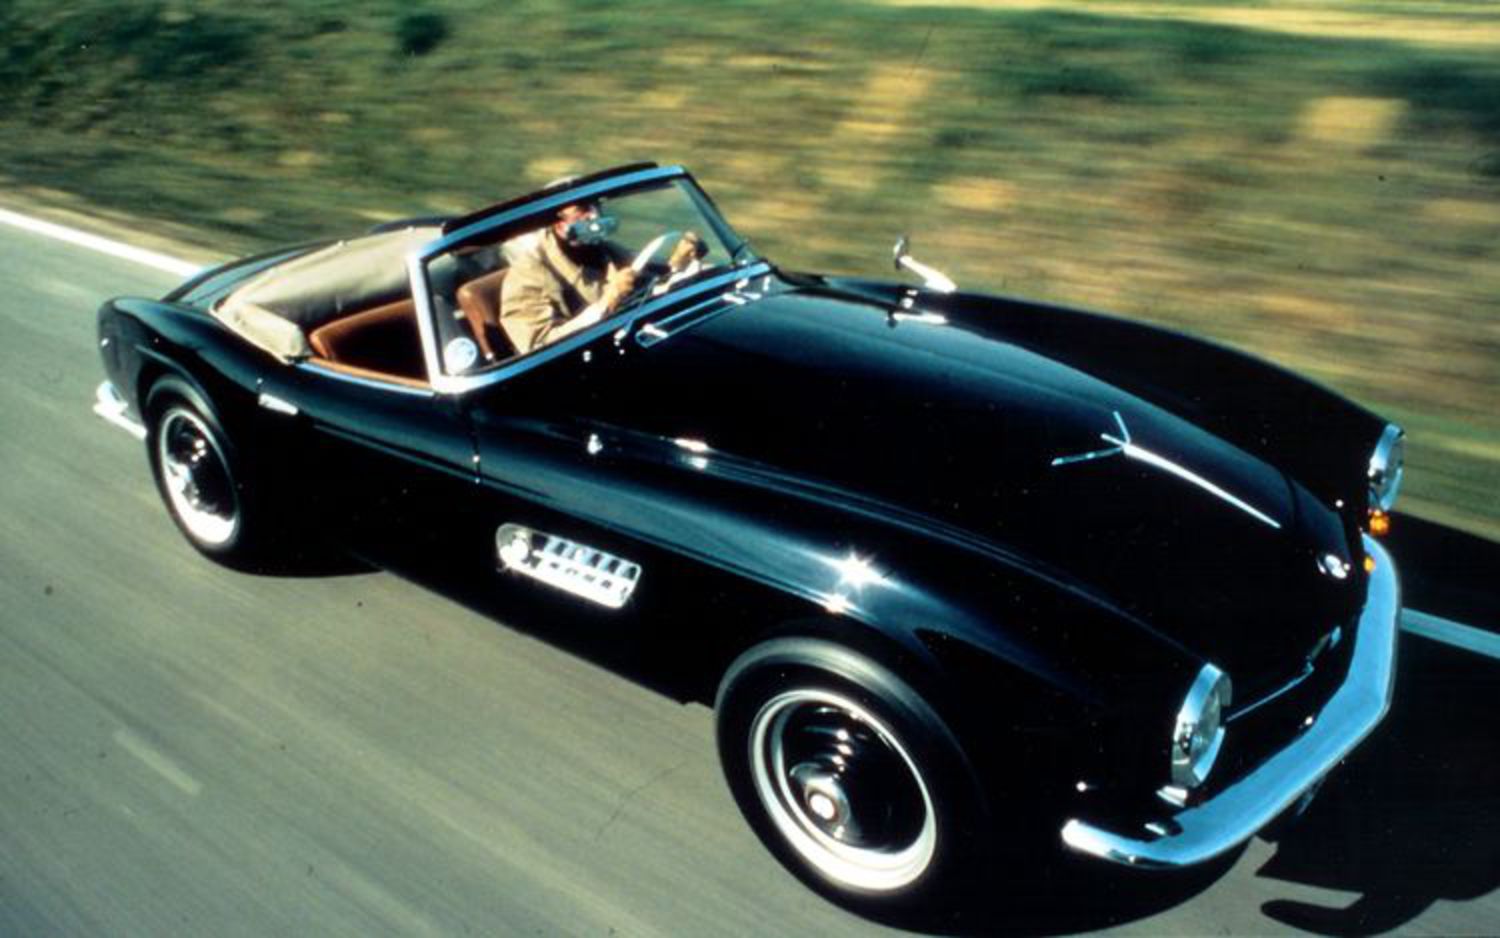 The BMW 507 Roadster. Few countries are as gifted with engines as Germany.